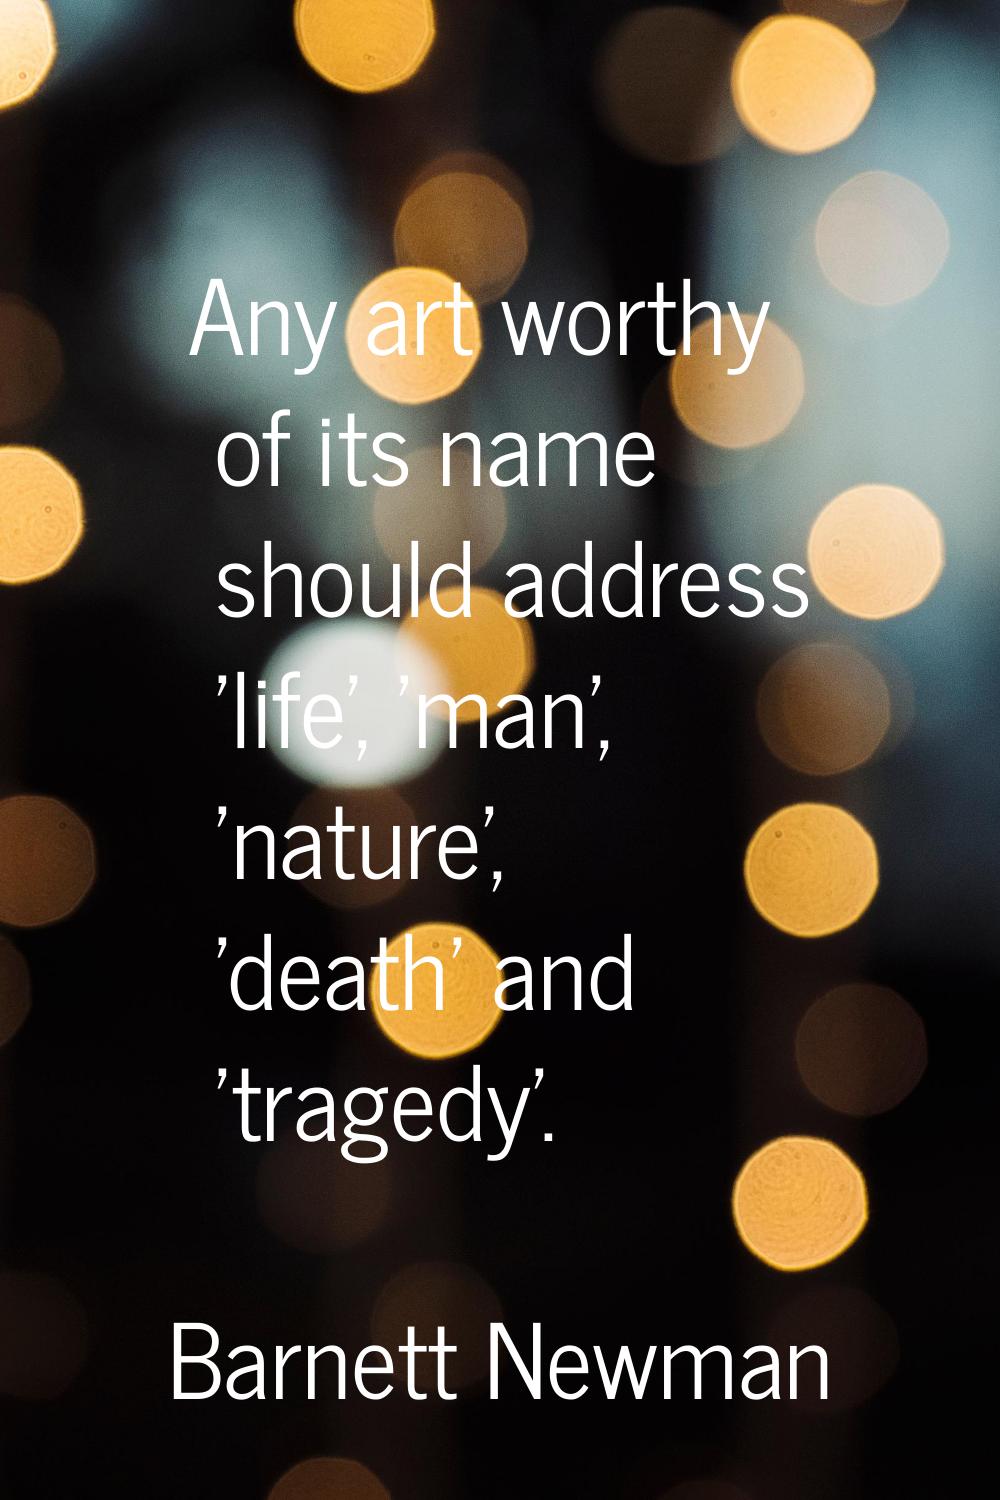 Any art worthy of its name should address 'life', 'man', 'nature', 'death' and 'tragedy'.